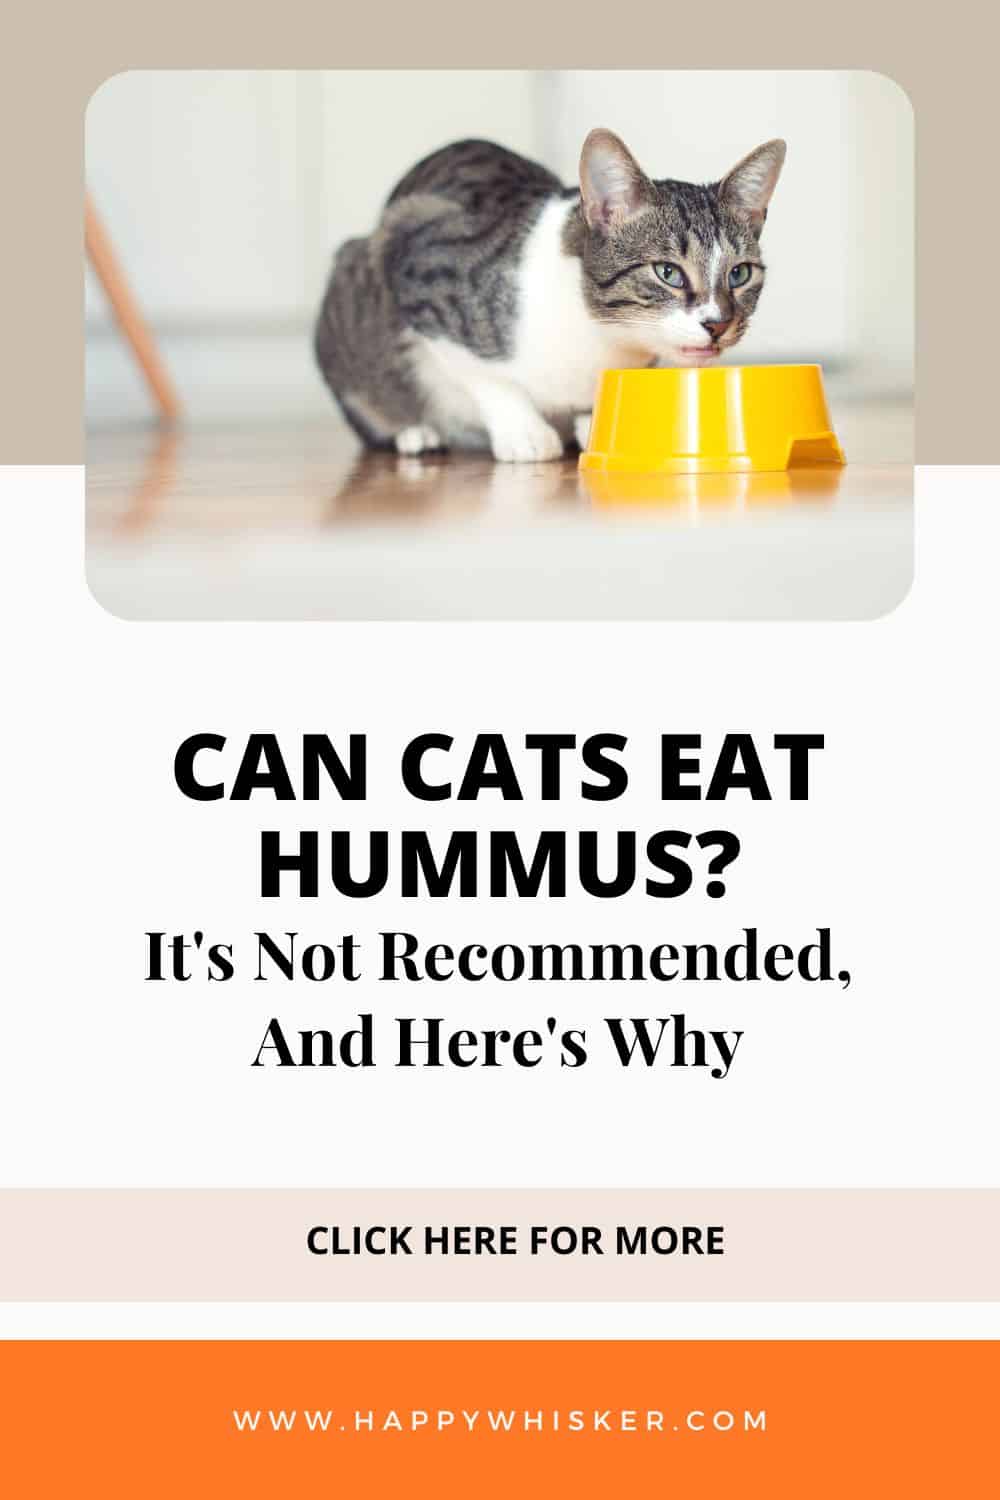 Can Cats Eat Hummus It's Not Recommended, And Here's Why Pinterest